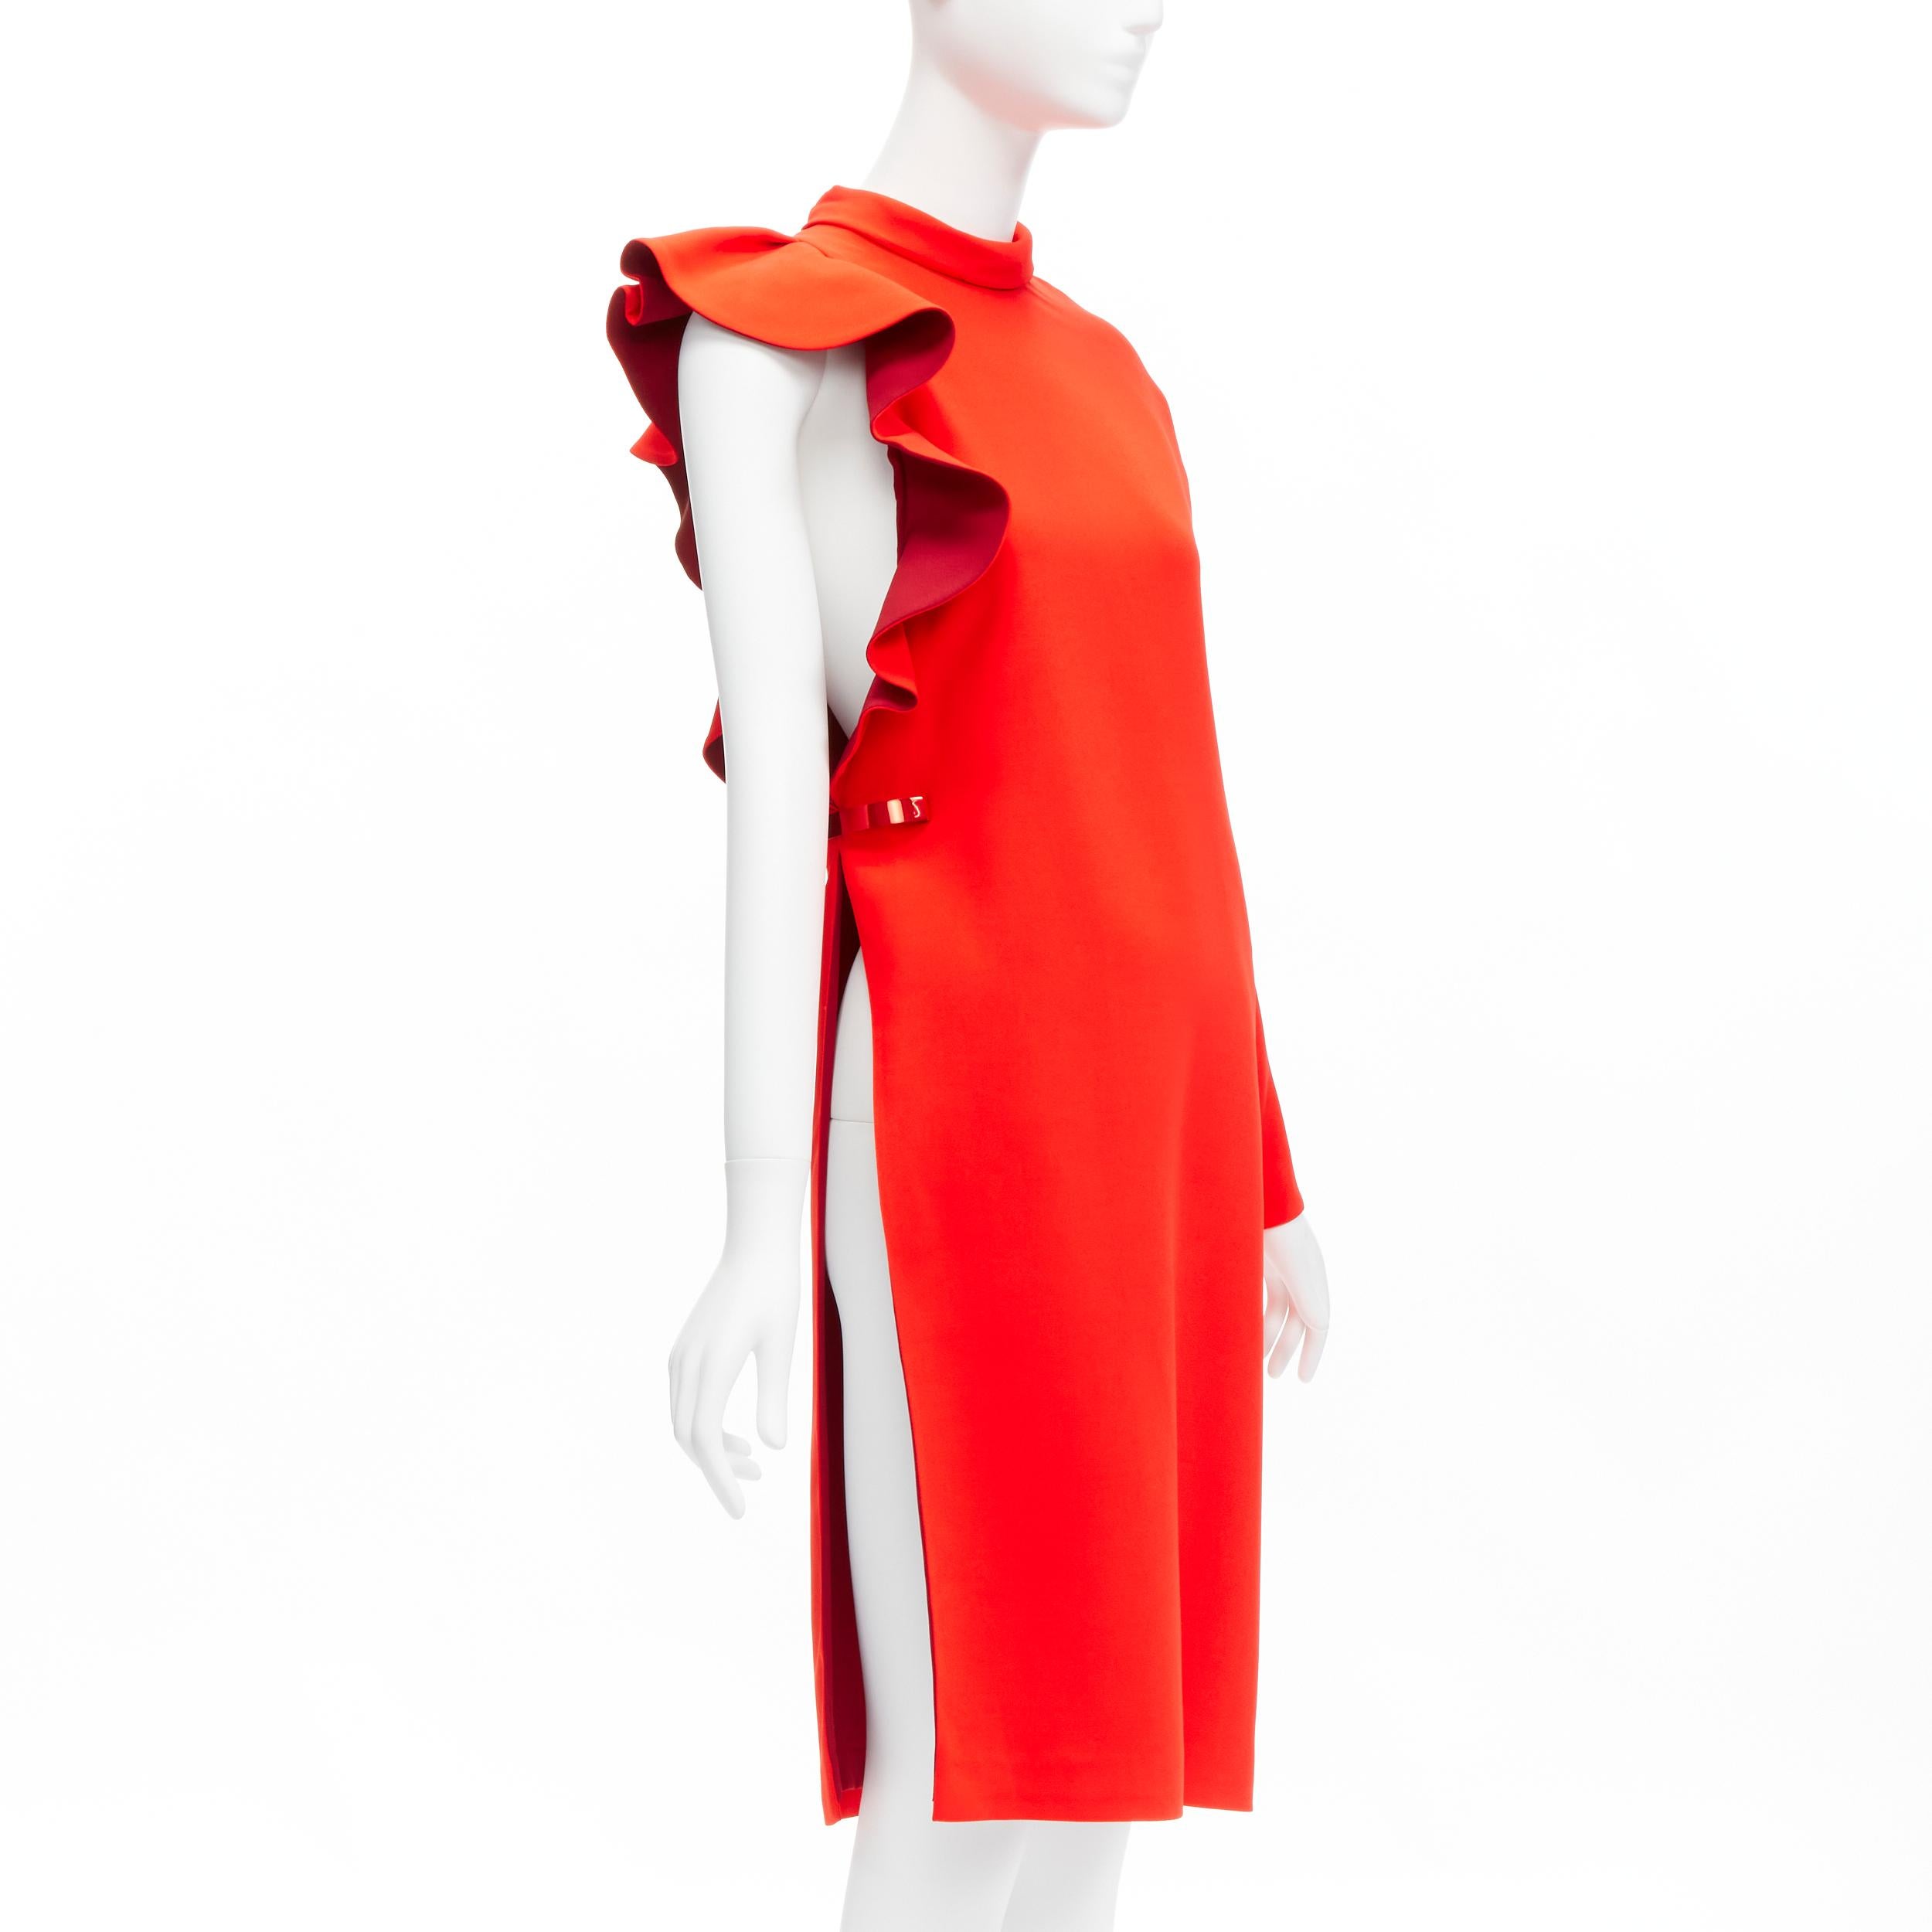 GIVENCHY 2017 Tisci Tribute red crepe metal bar ruffle cutout tunic top FR36 S
Reference: TGAS/D00260
Brand: Givenchy
Collection: AW2017 Final Tribute
Material: Crepe
Color: Red
Pattern: Solid
Closure: Zip
Lining: Red Fabric
Extra Details: Back zip